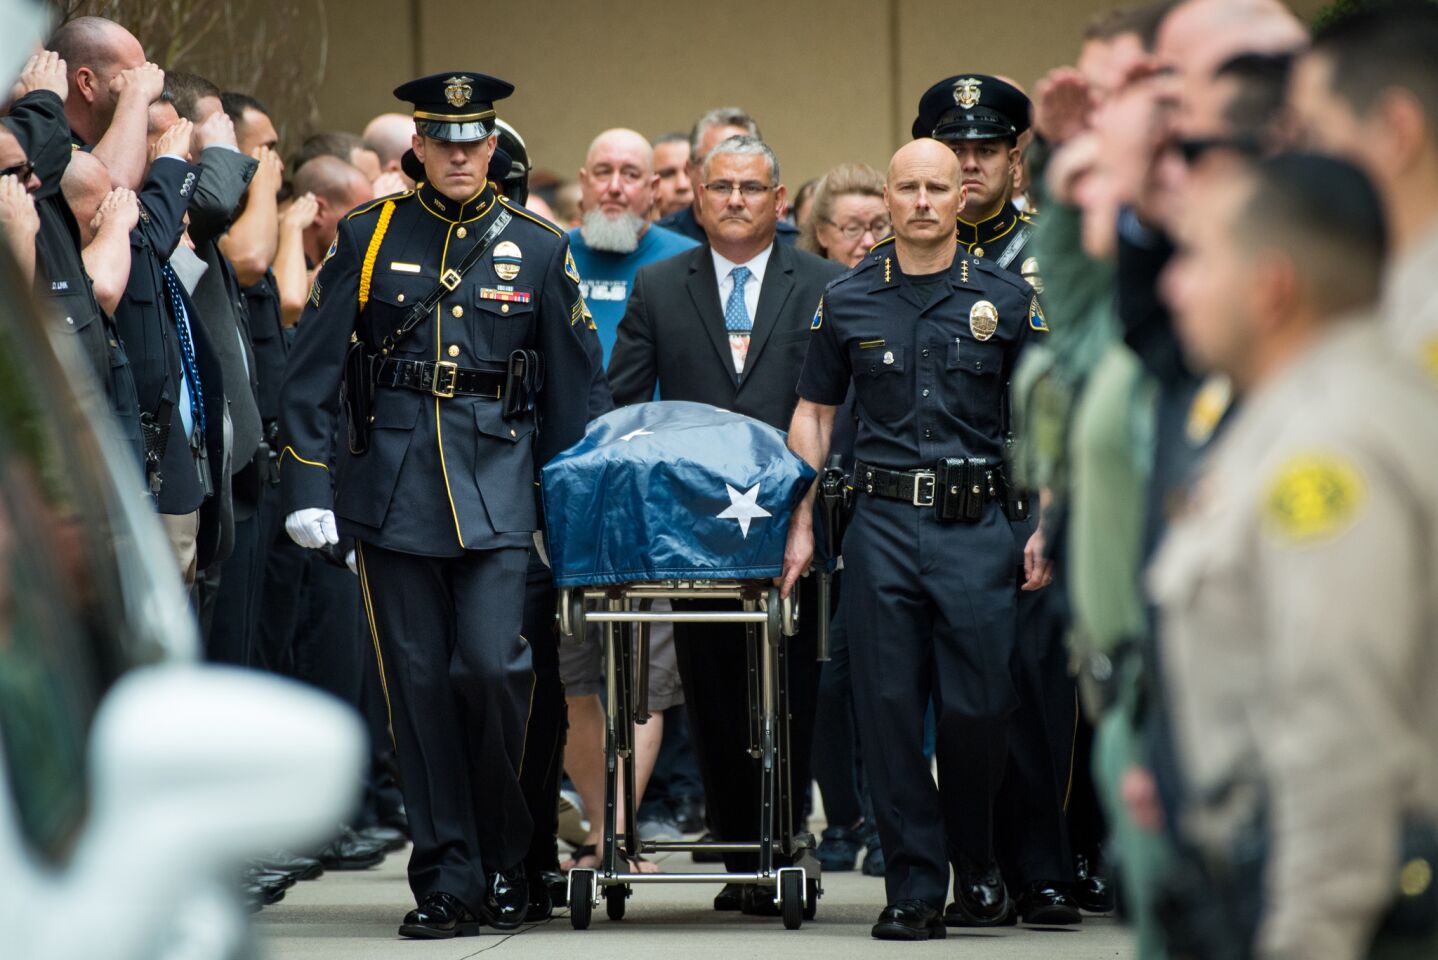 Whittier Police Chief Jeff Piper, right, and other law enforcement personnel escort the body of a slain Whittier police officer from UC Irvine Medical Center.